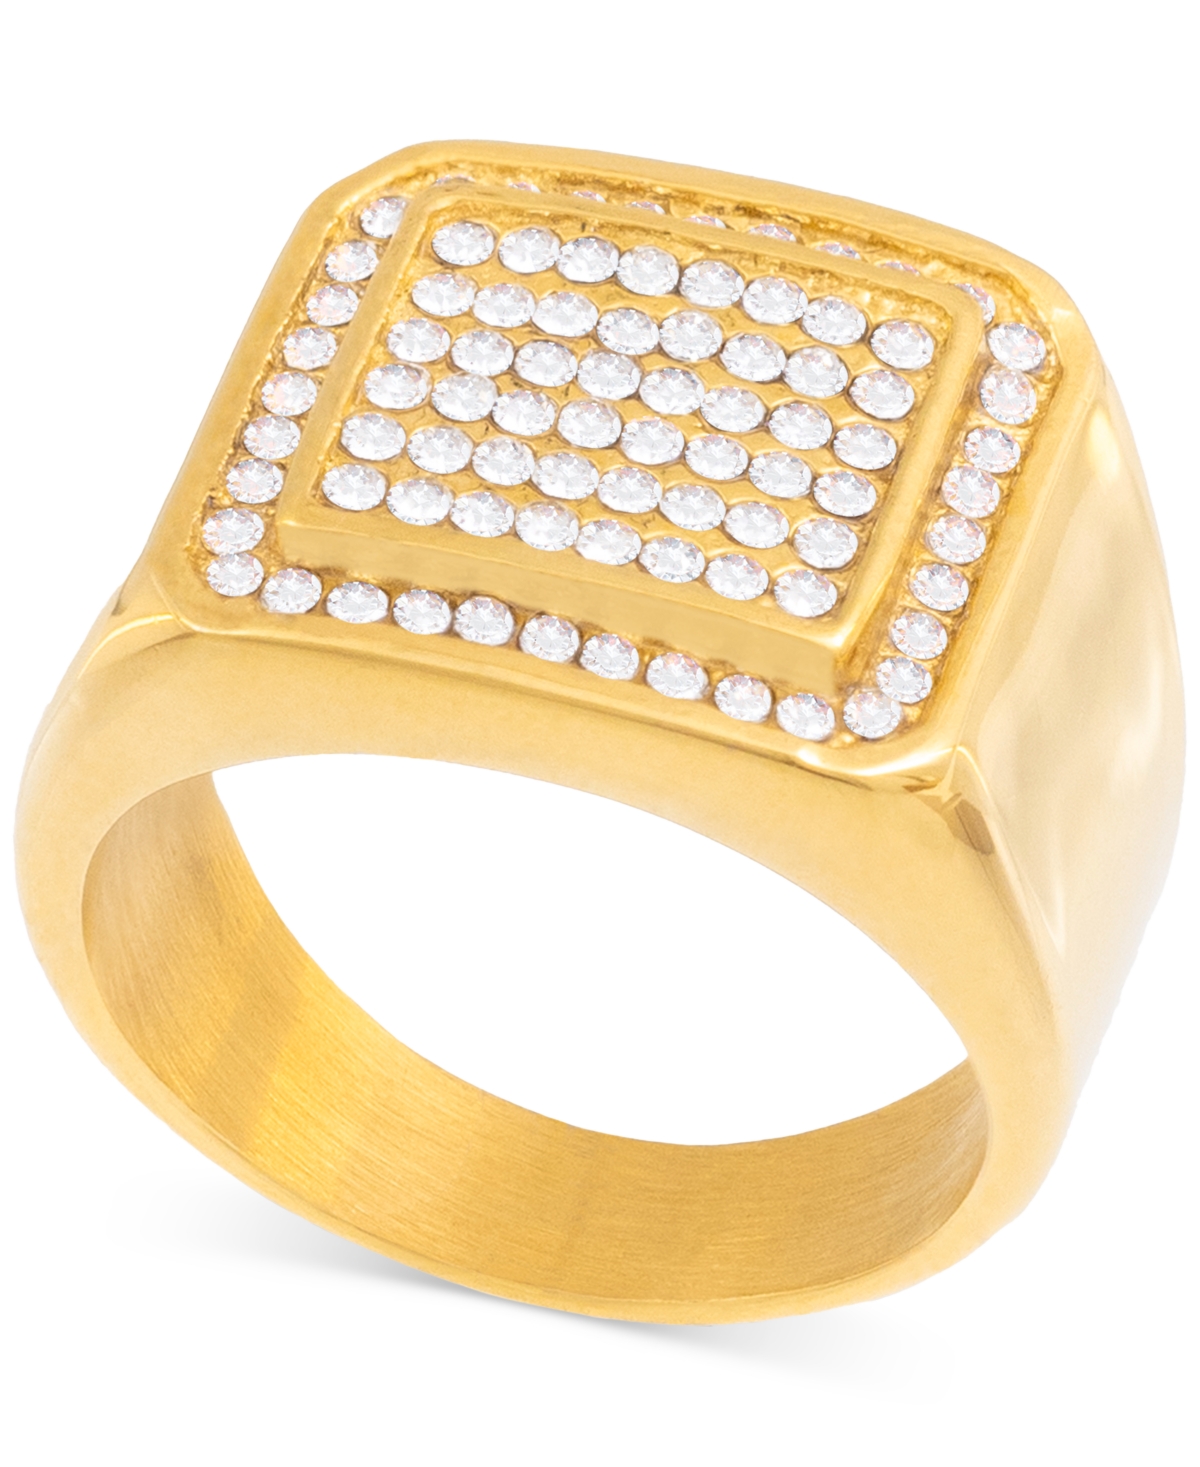 Smith Men's Crystal Square Cluster Ring in Gold-Tone Ion-Plated Stainless Steel - Gold-Tone